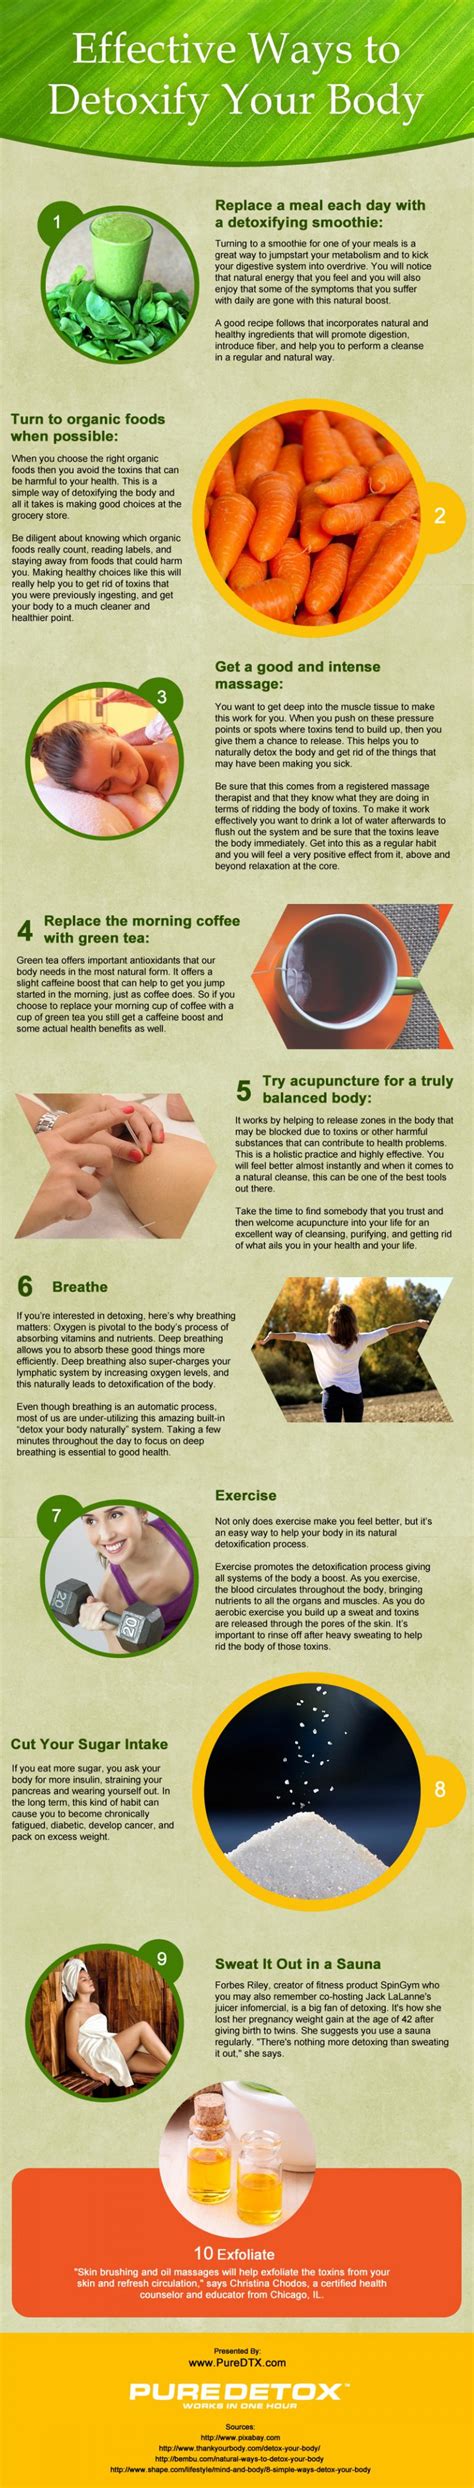 Effective Ways To Detoxify Your Body Infographic